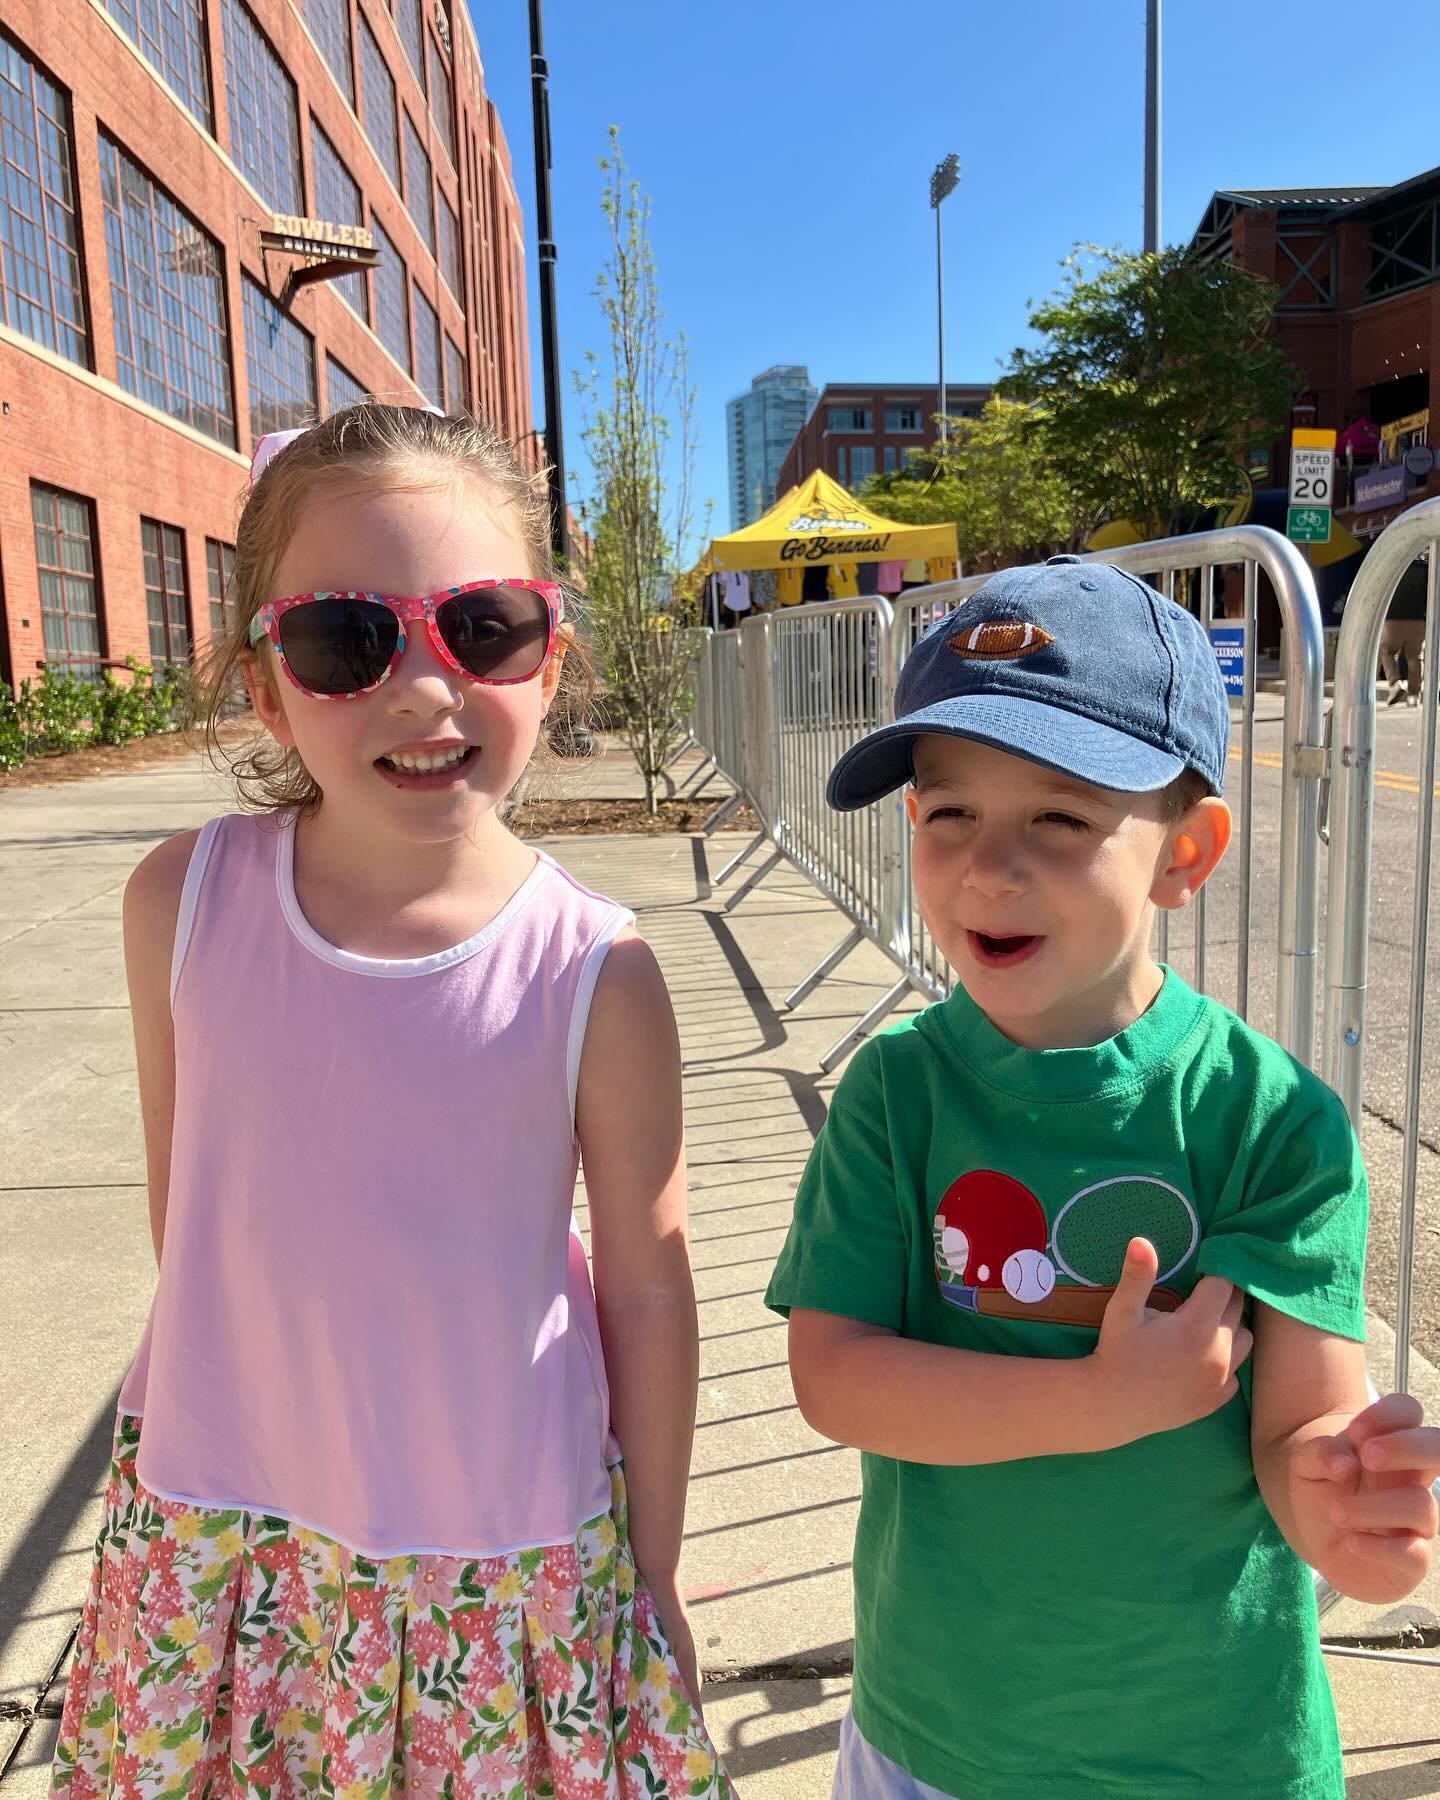 We had a blast out @durhambulls with @thesavbananas today! Could not have asked for better weather or better company! 
#bananaball 
#durham 
#dadlife